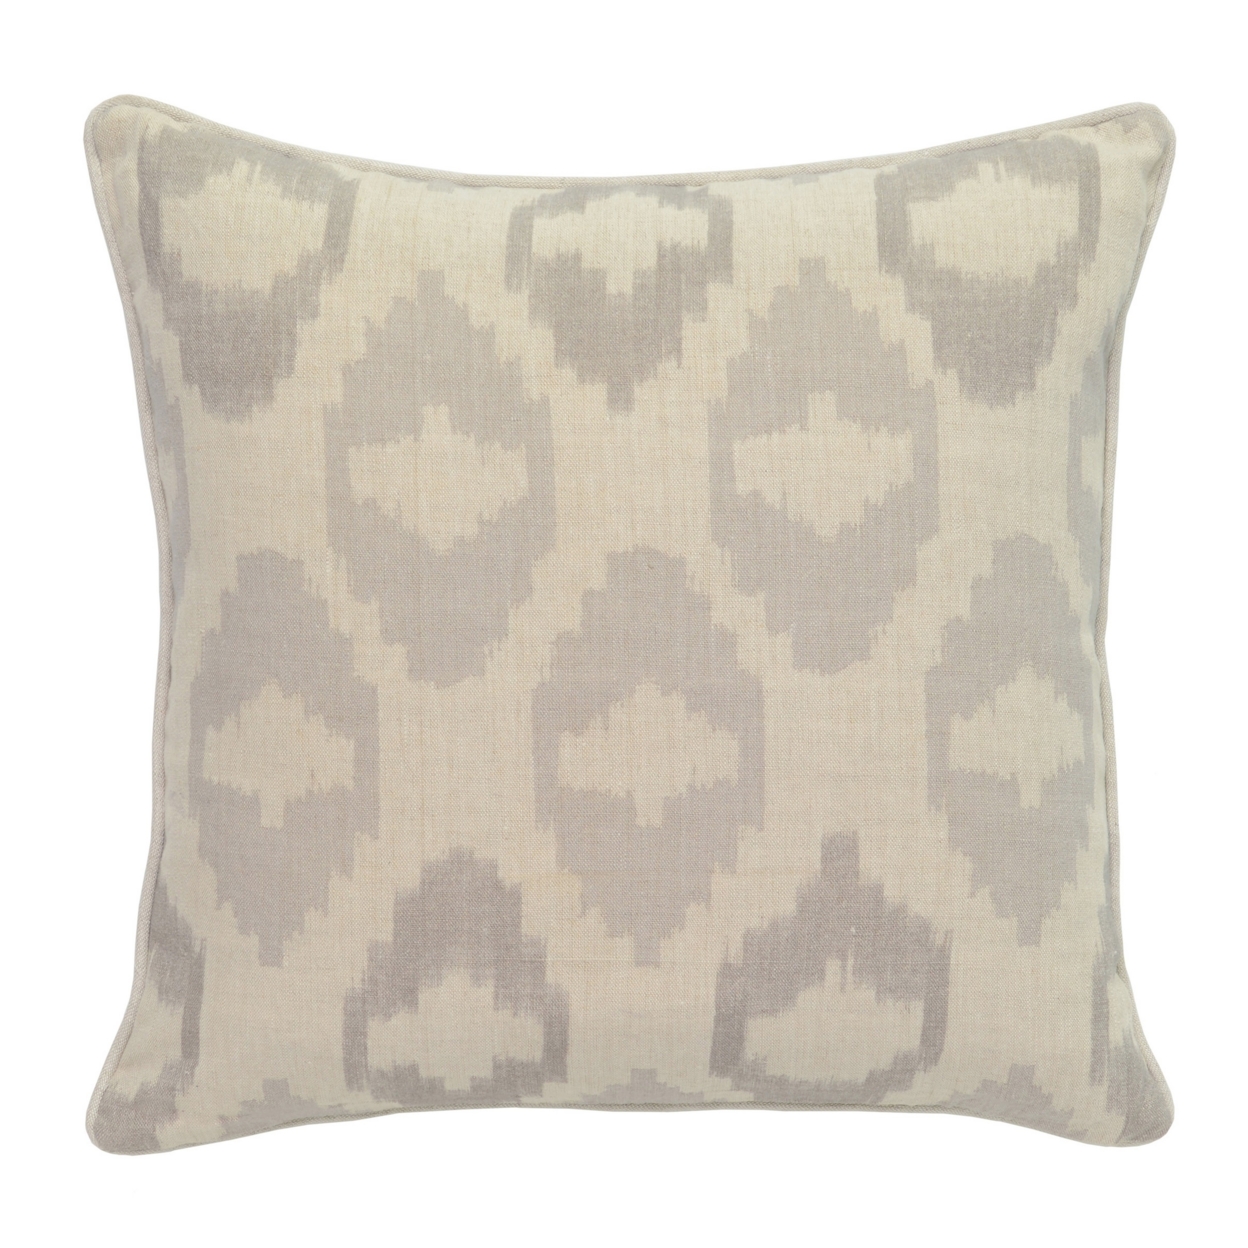 Square Fabric Throw Pillow With Metallic Embroidered Details,Gray And Beige- Saltoro Sherpi